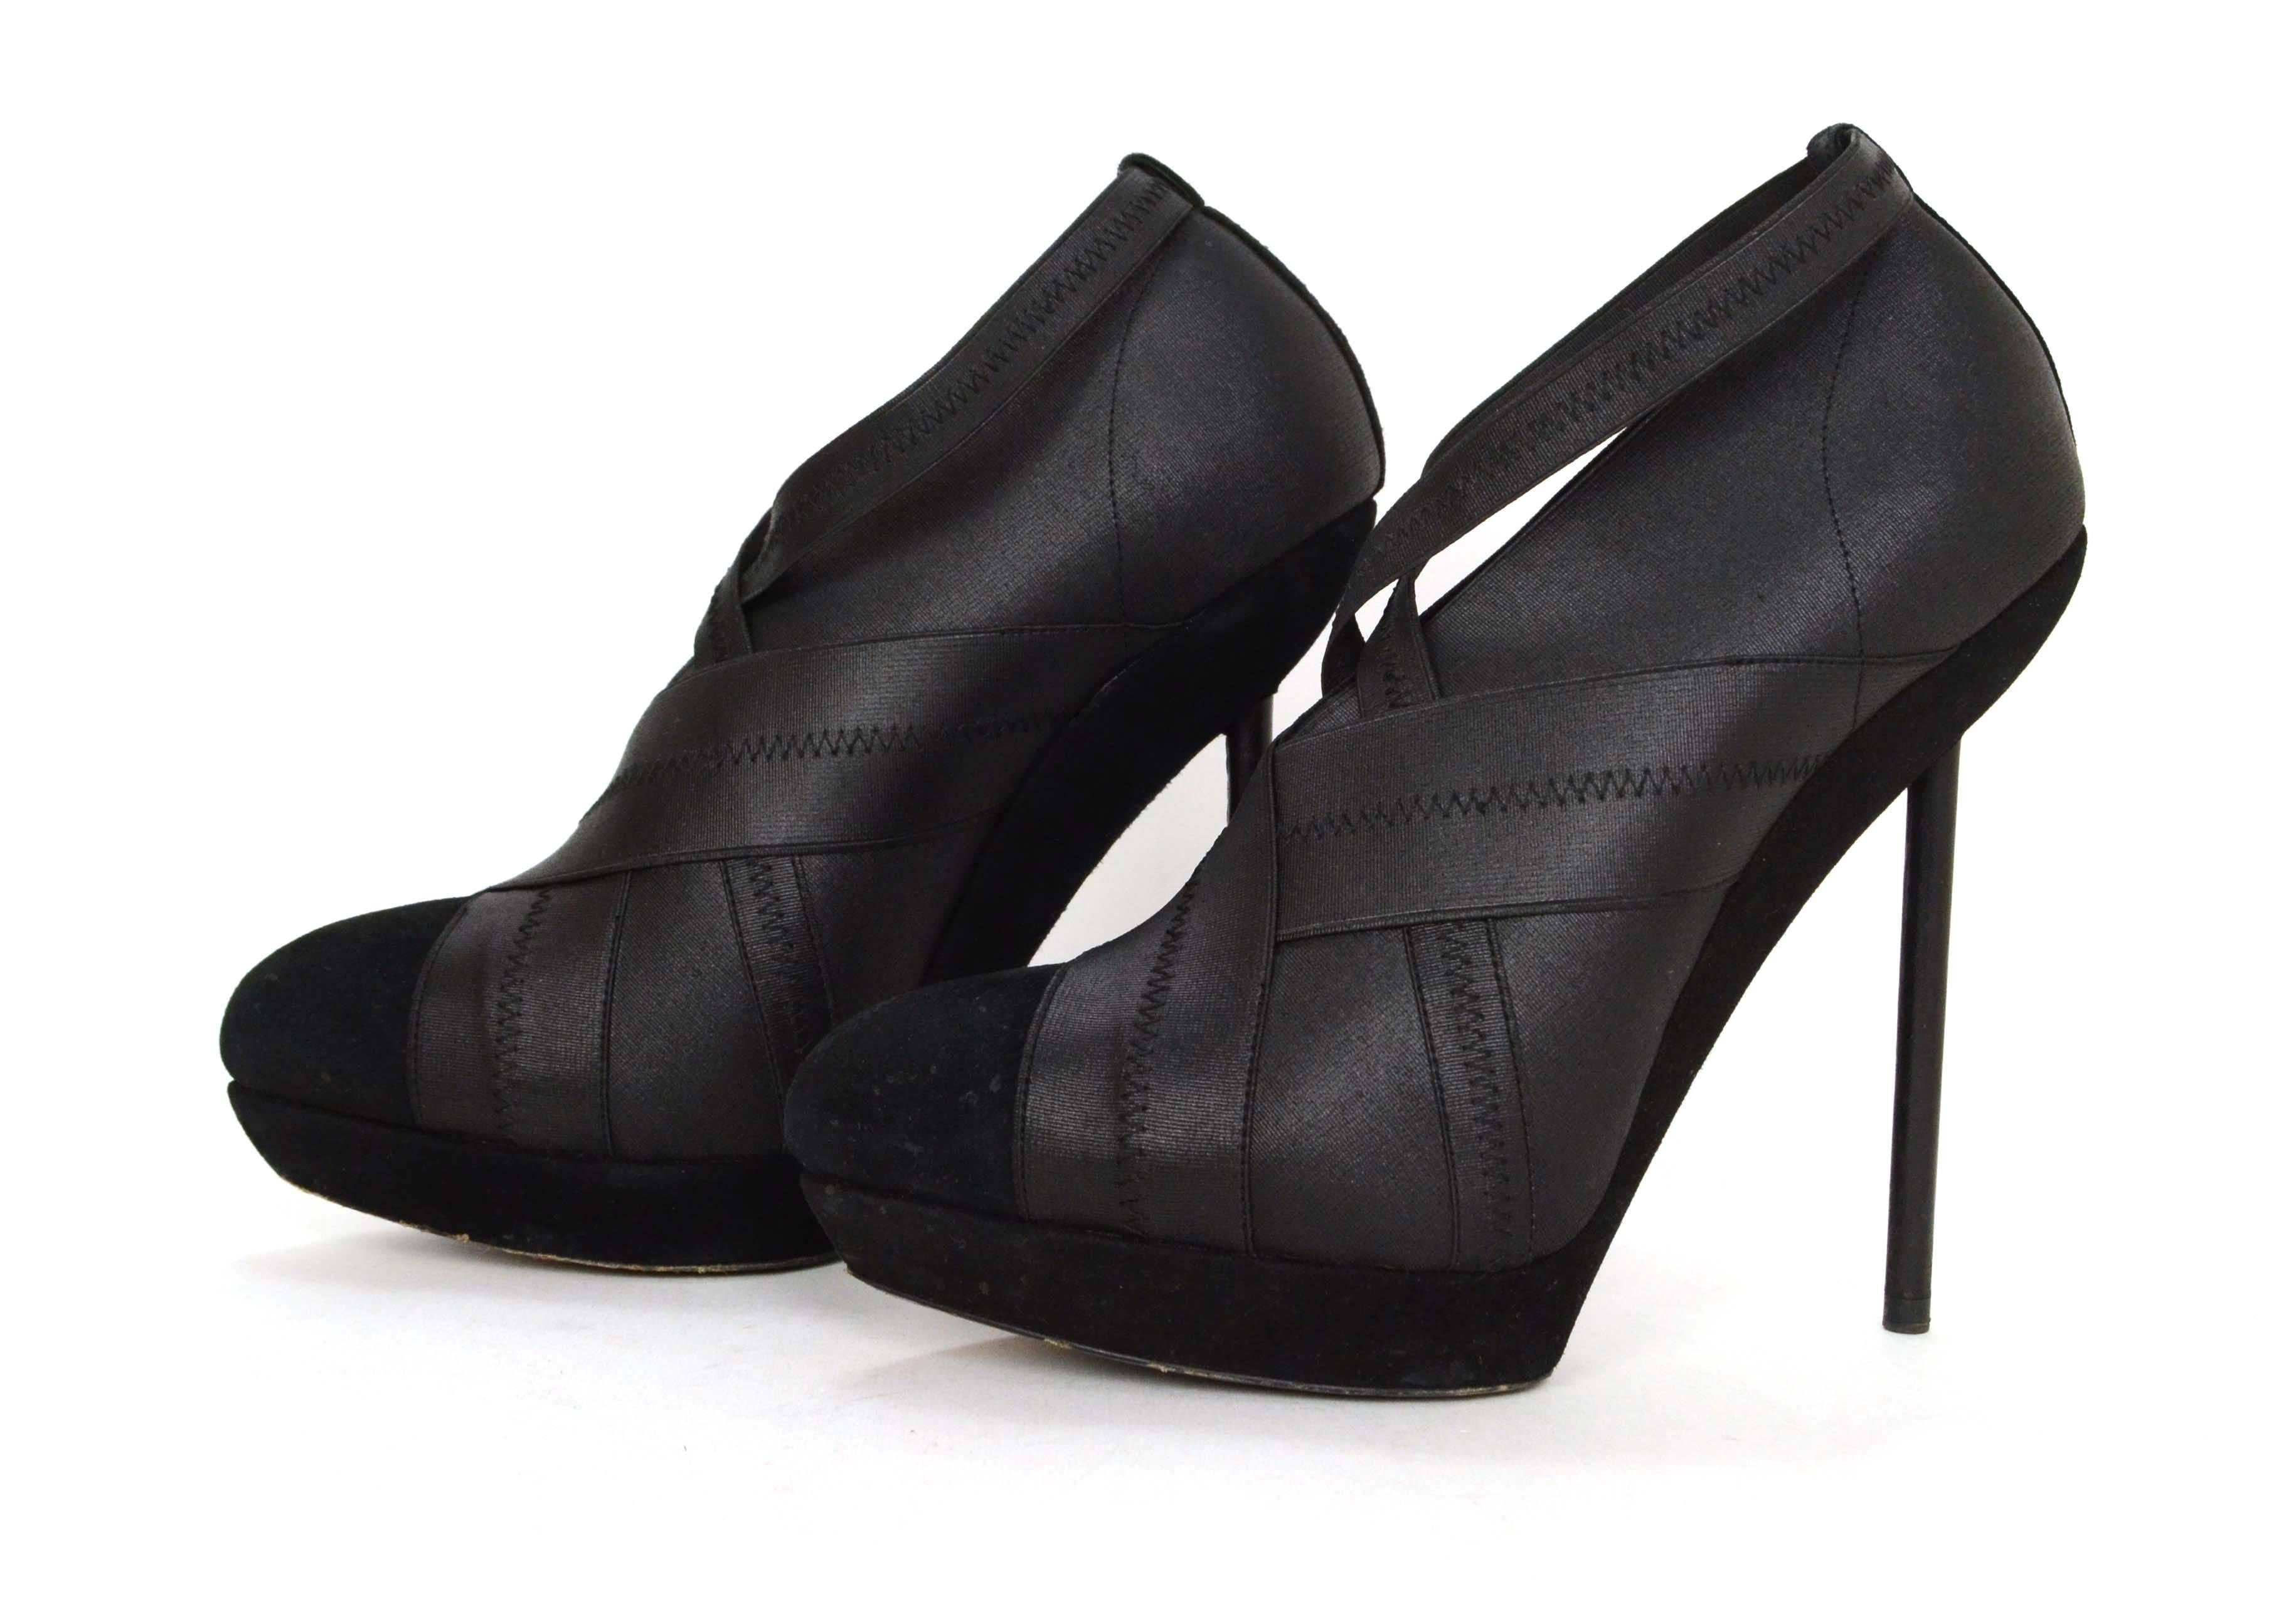 Yves Saint Laurent YSL Black Bandage Stiletto Pumps
Features suede platform and toe cap
Color: Black
Materials: Suede and elastic
Closure/Opening: Pull on
Sole Stamp: Not legible- has been worn off
Overall Condition: Excellent pre-owned